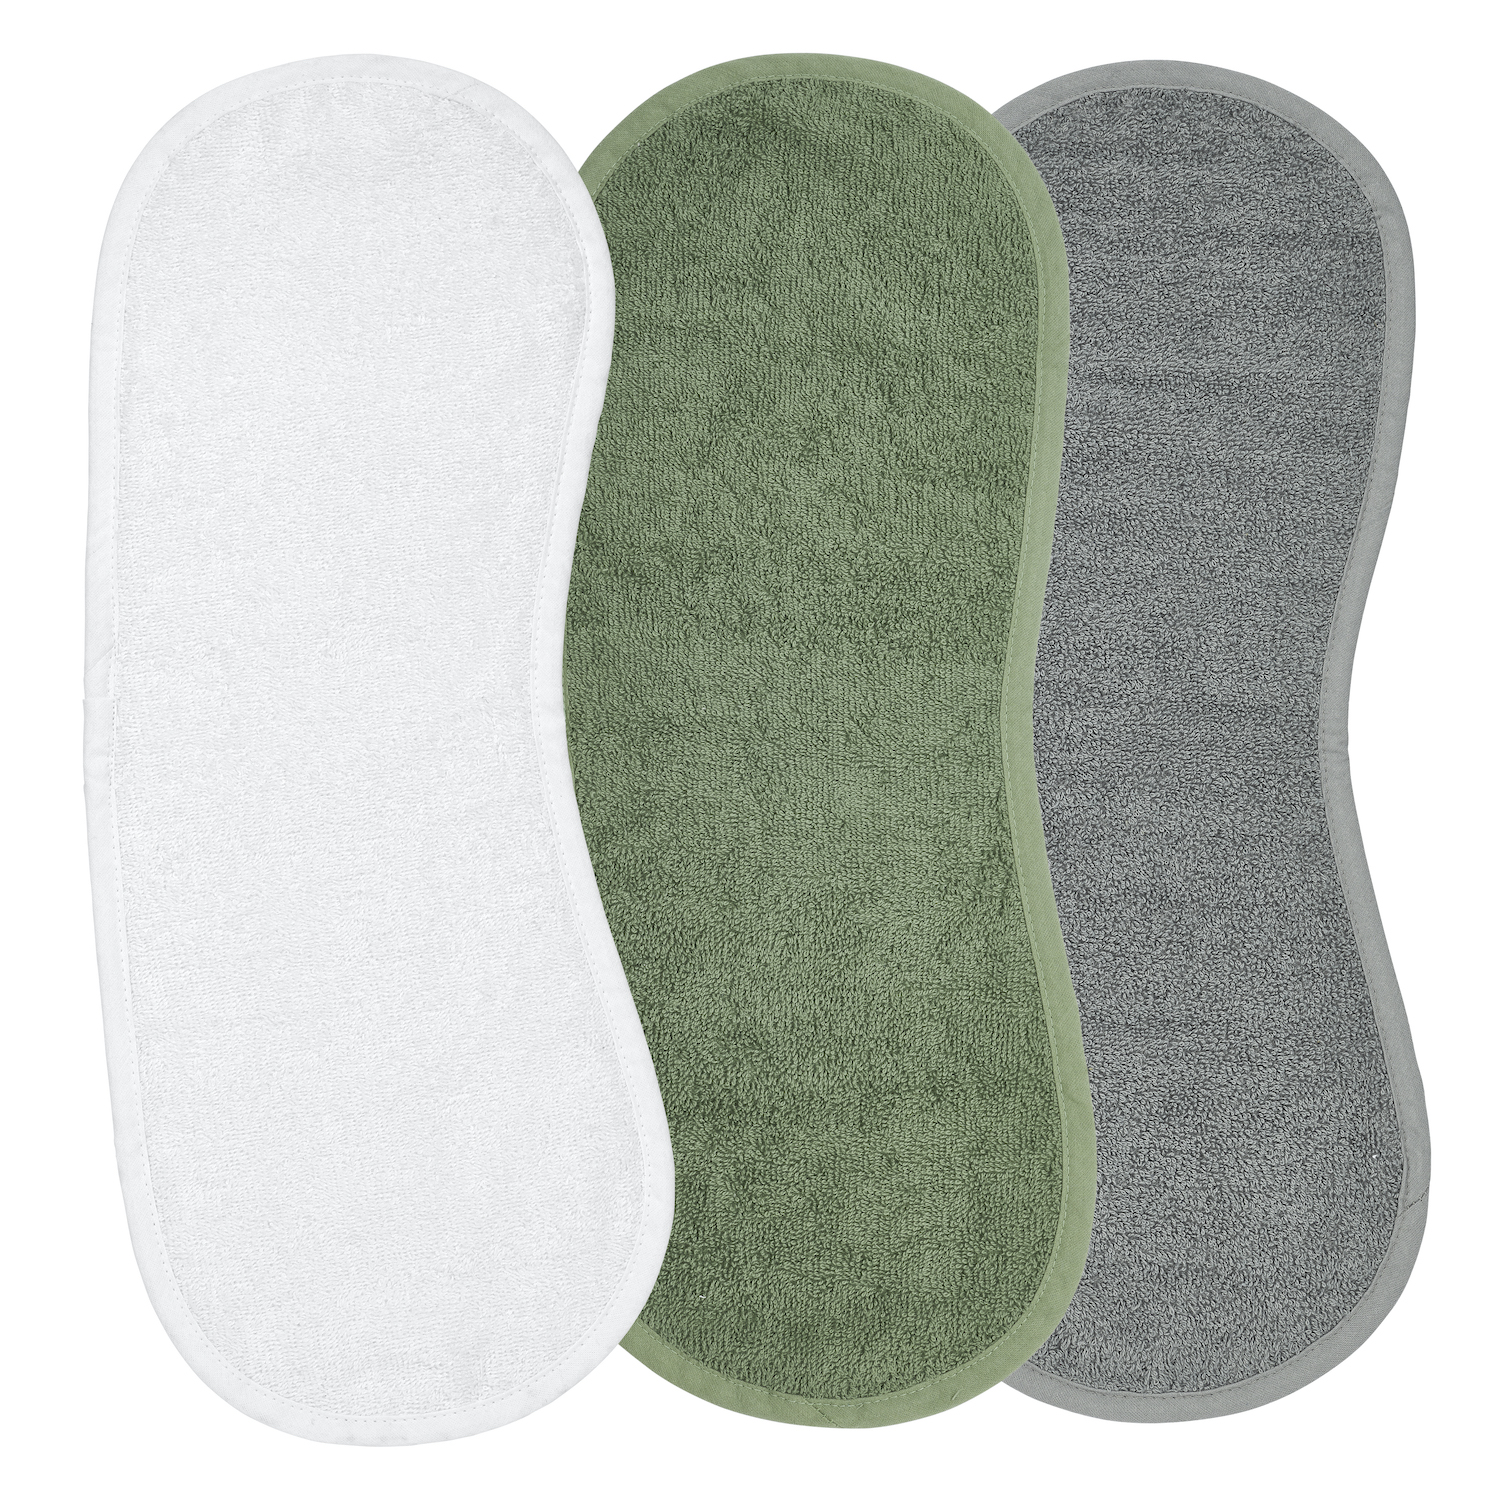 Spucktuch 3er pack frottee Uni - white/forest green/grey - 53x20cm